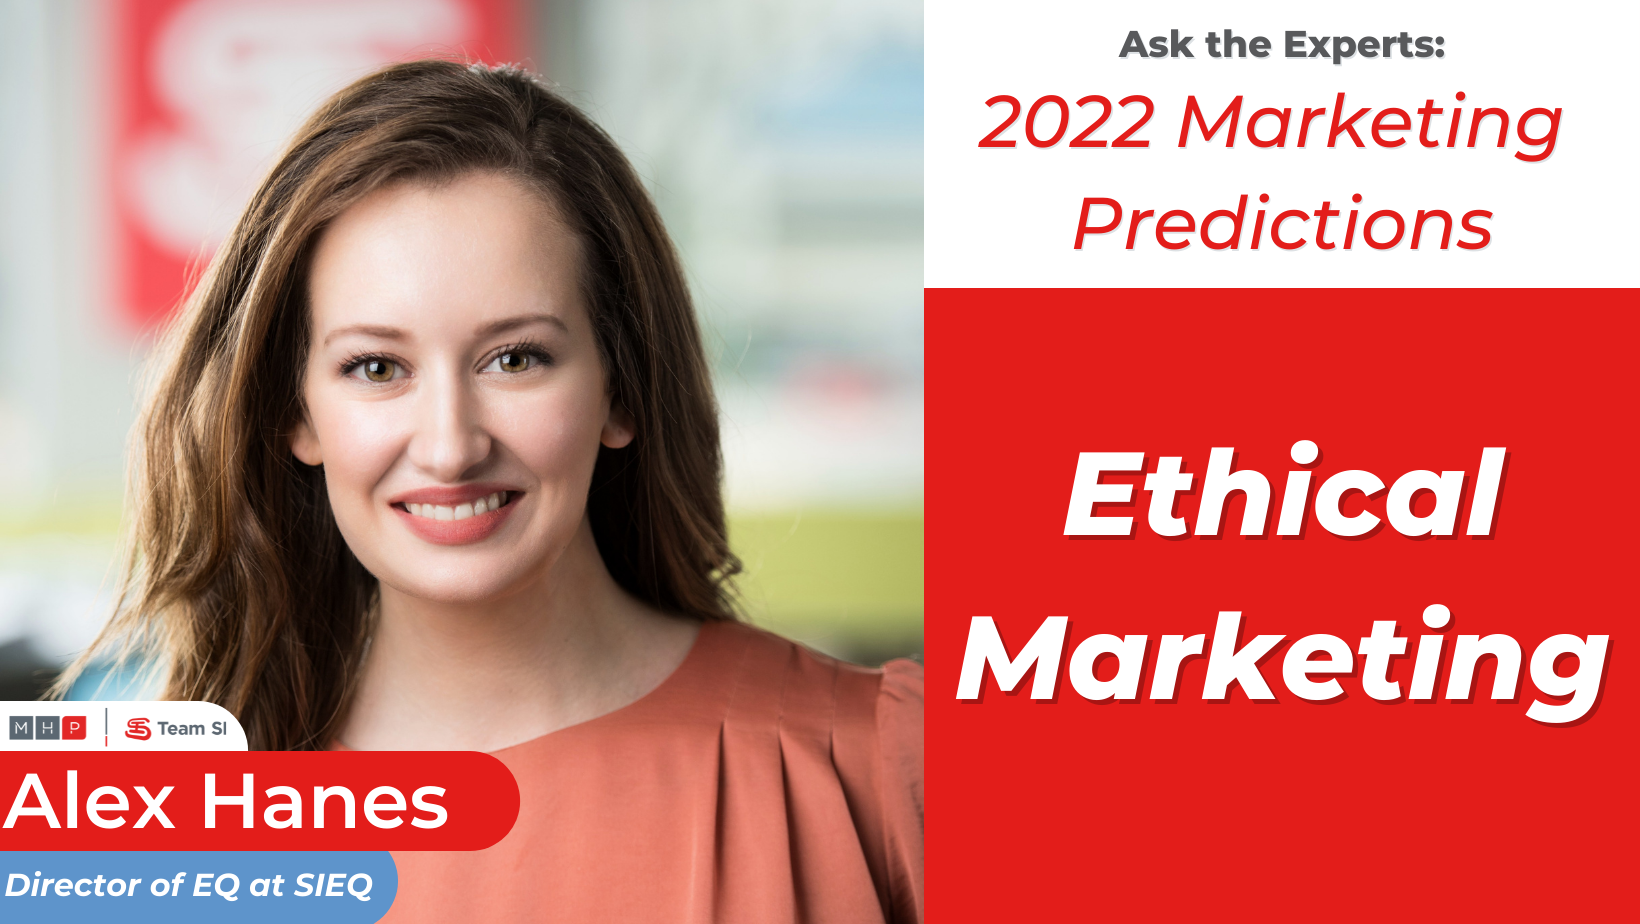 Director of EQ at SIEQ breaks down ethical marketing in 2022